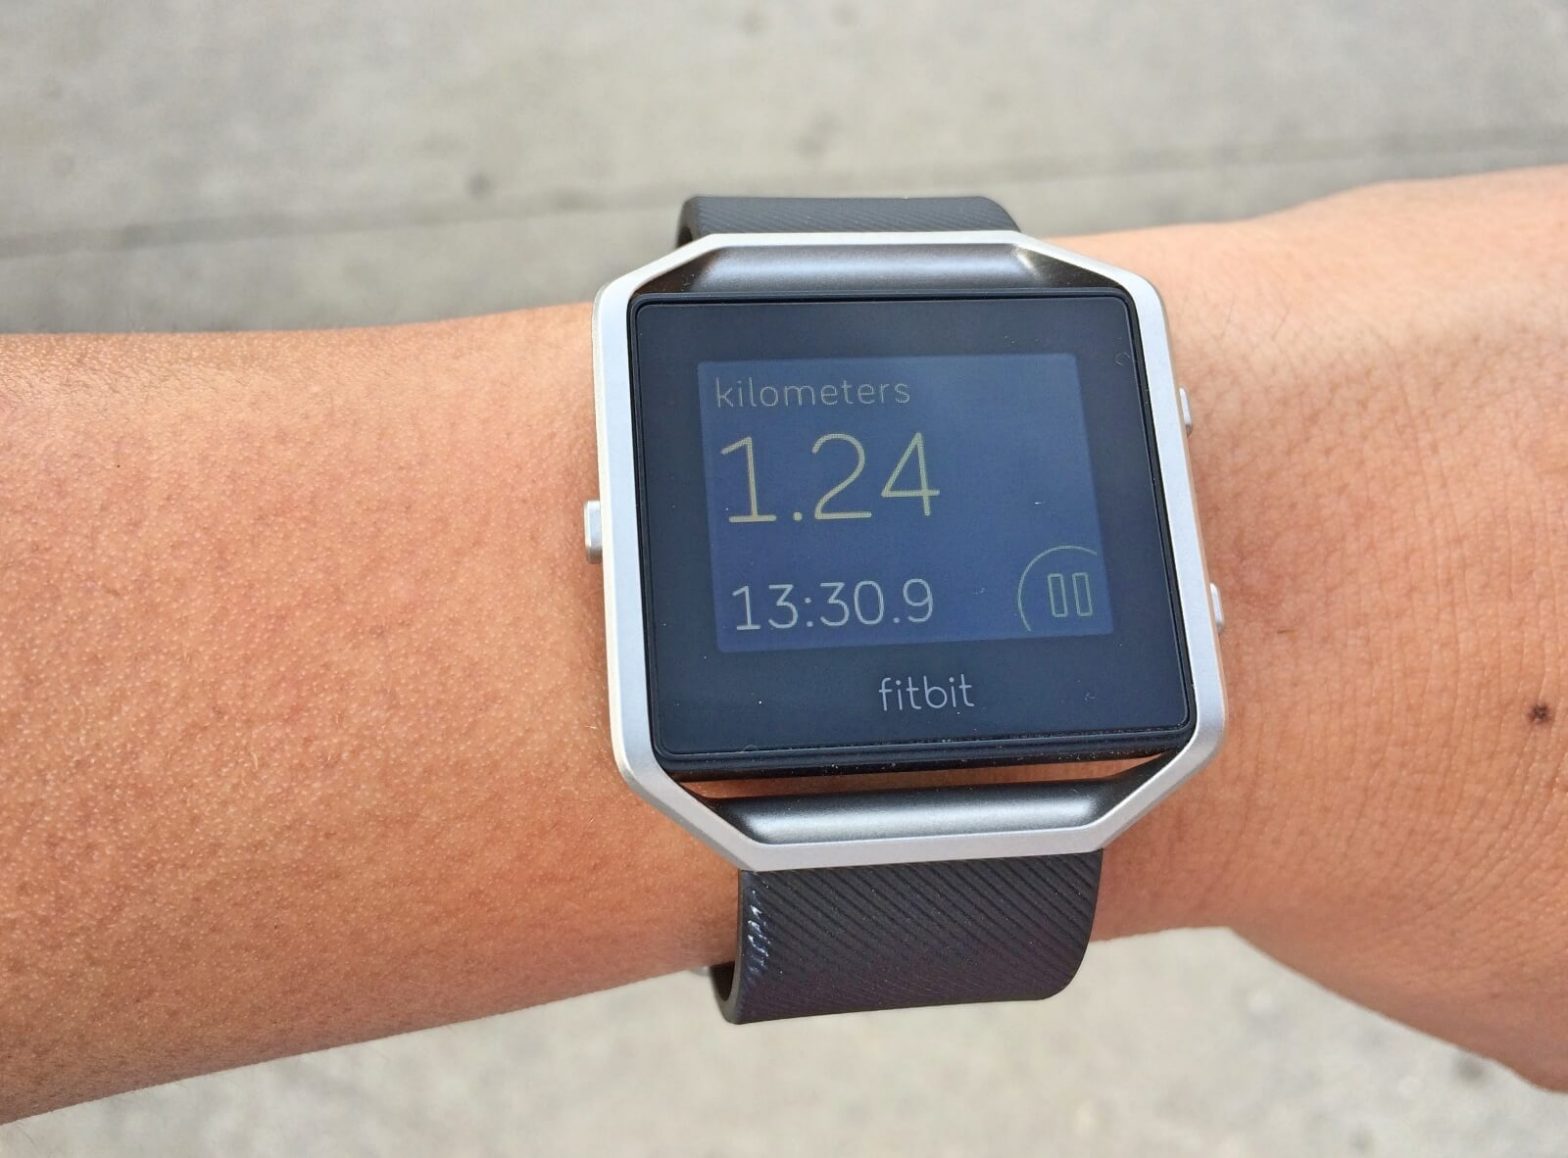 Review: Unboxing the Fitbit Blaze smartwatch and tracker